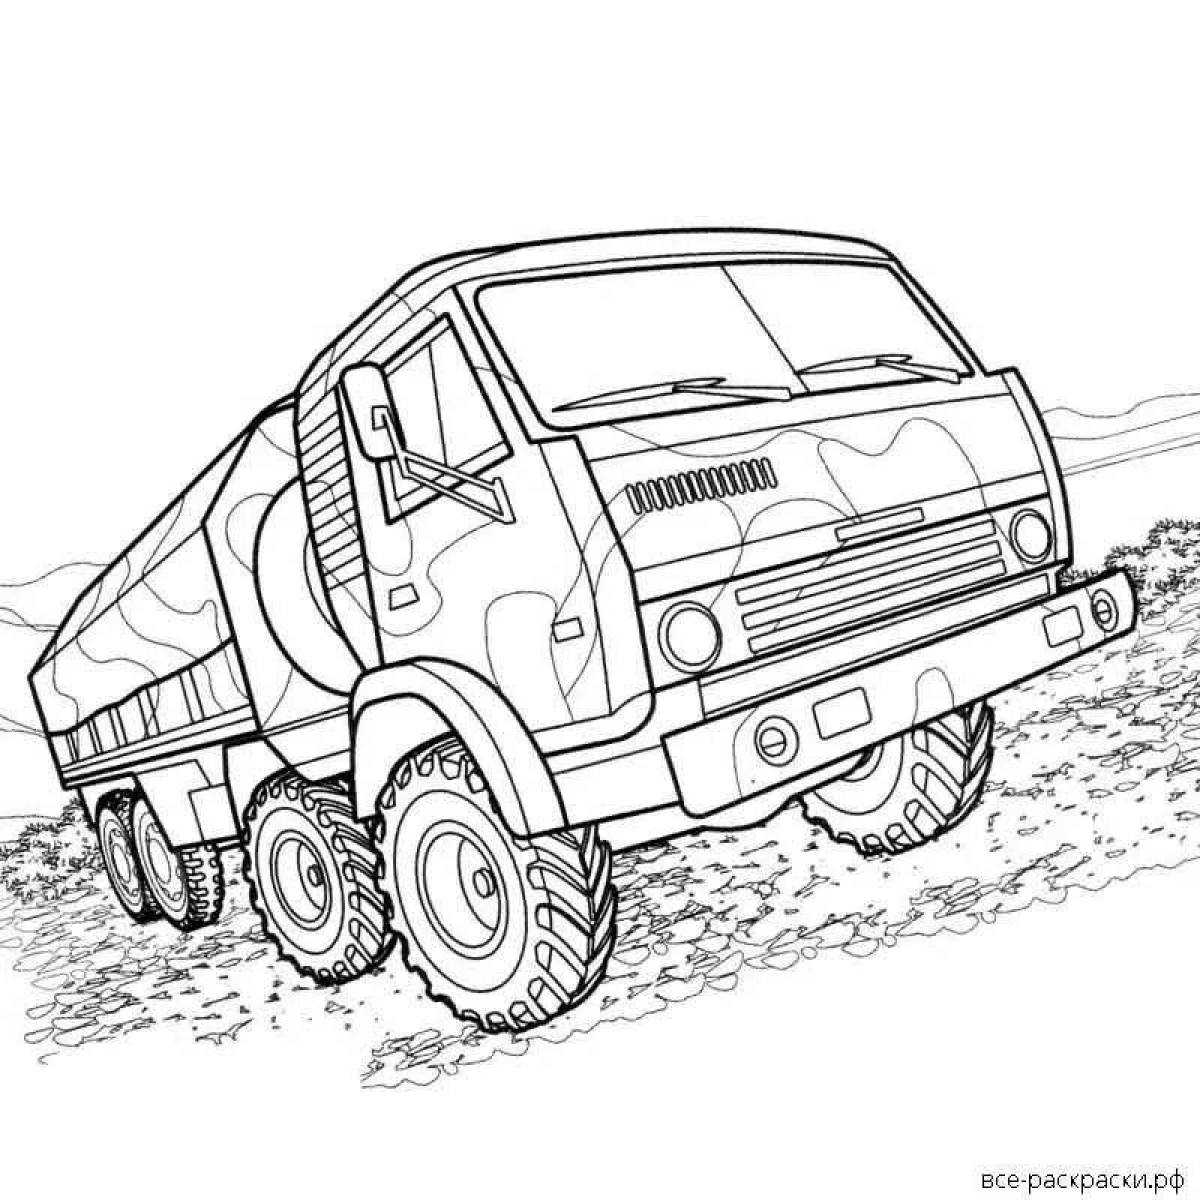 Charming kamaz coloring book for boys